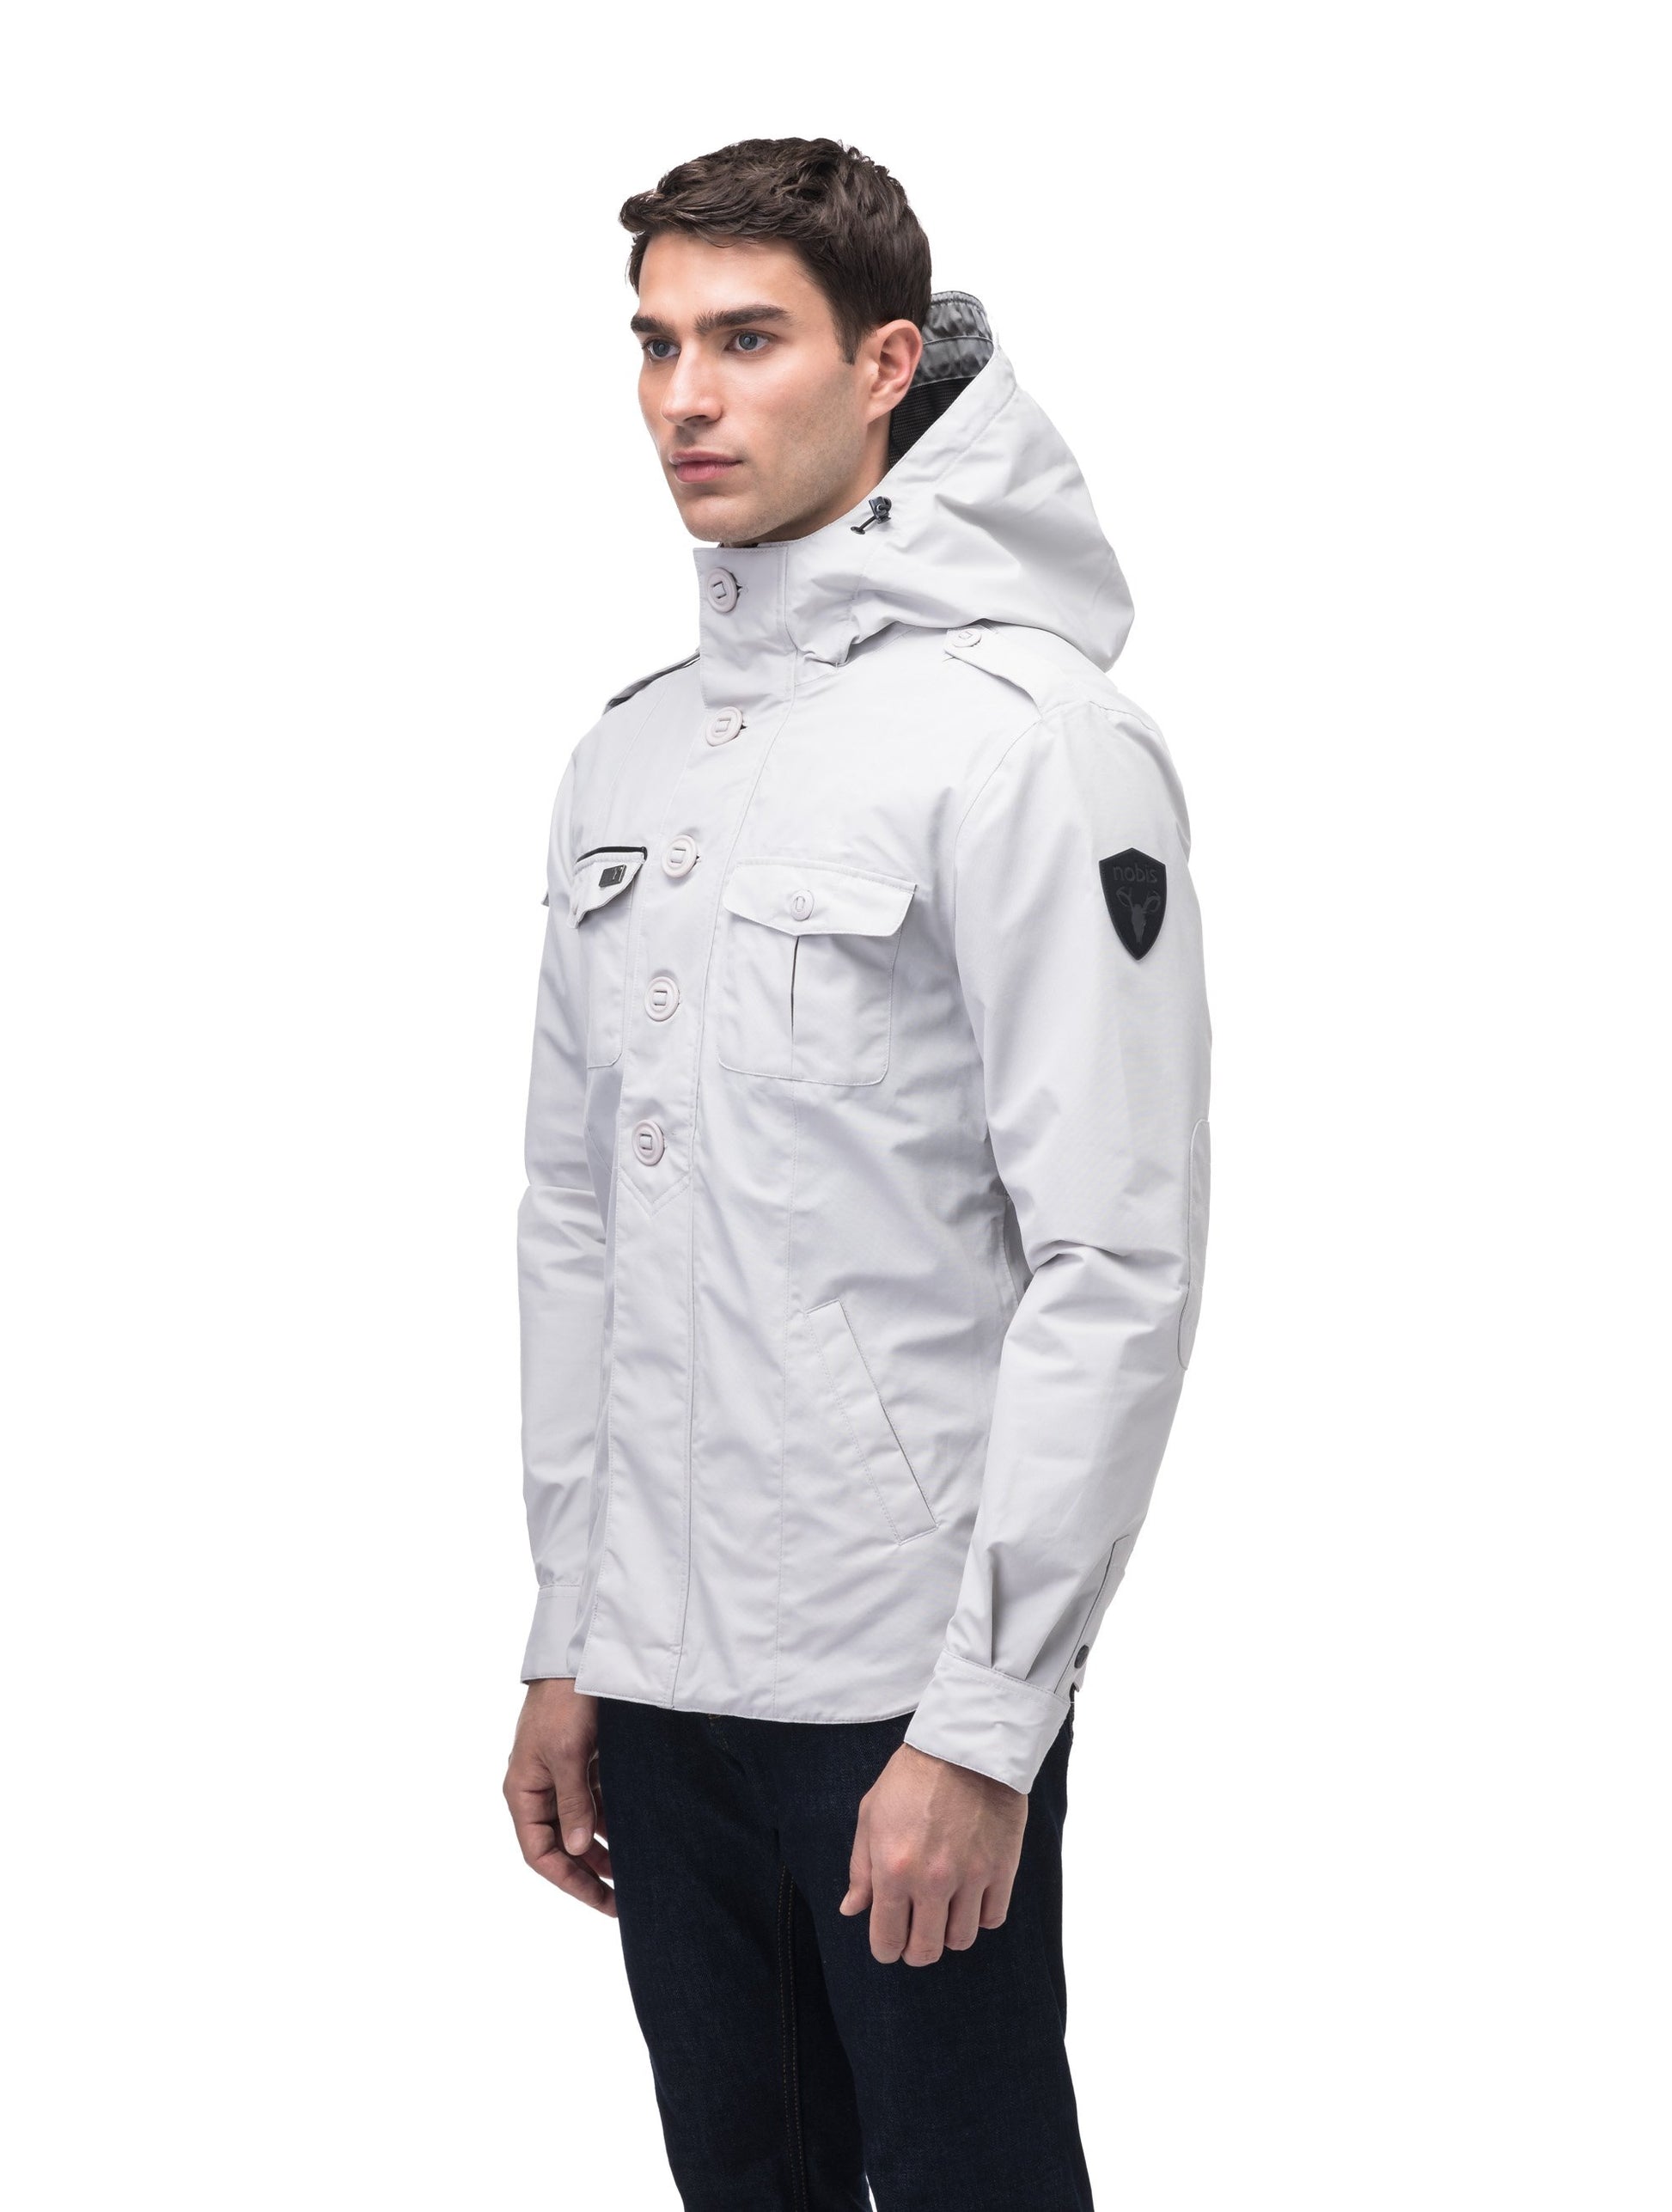 Men's hooded shirt jacket with patch chest pockets in Light Grey